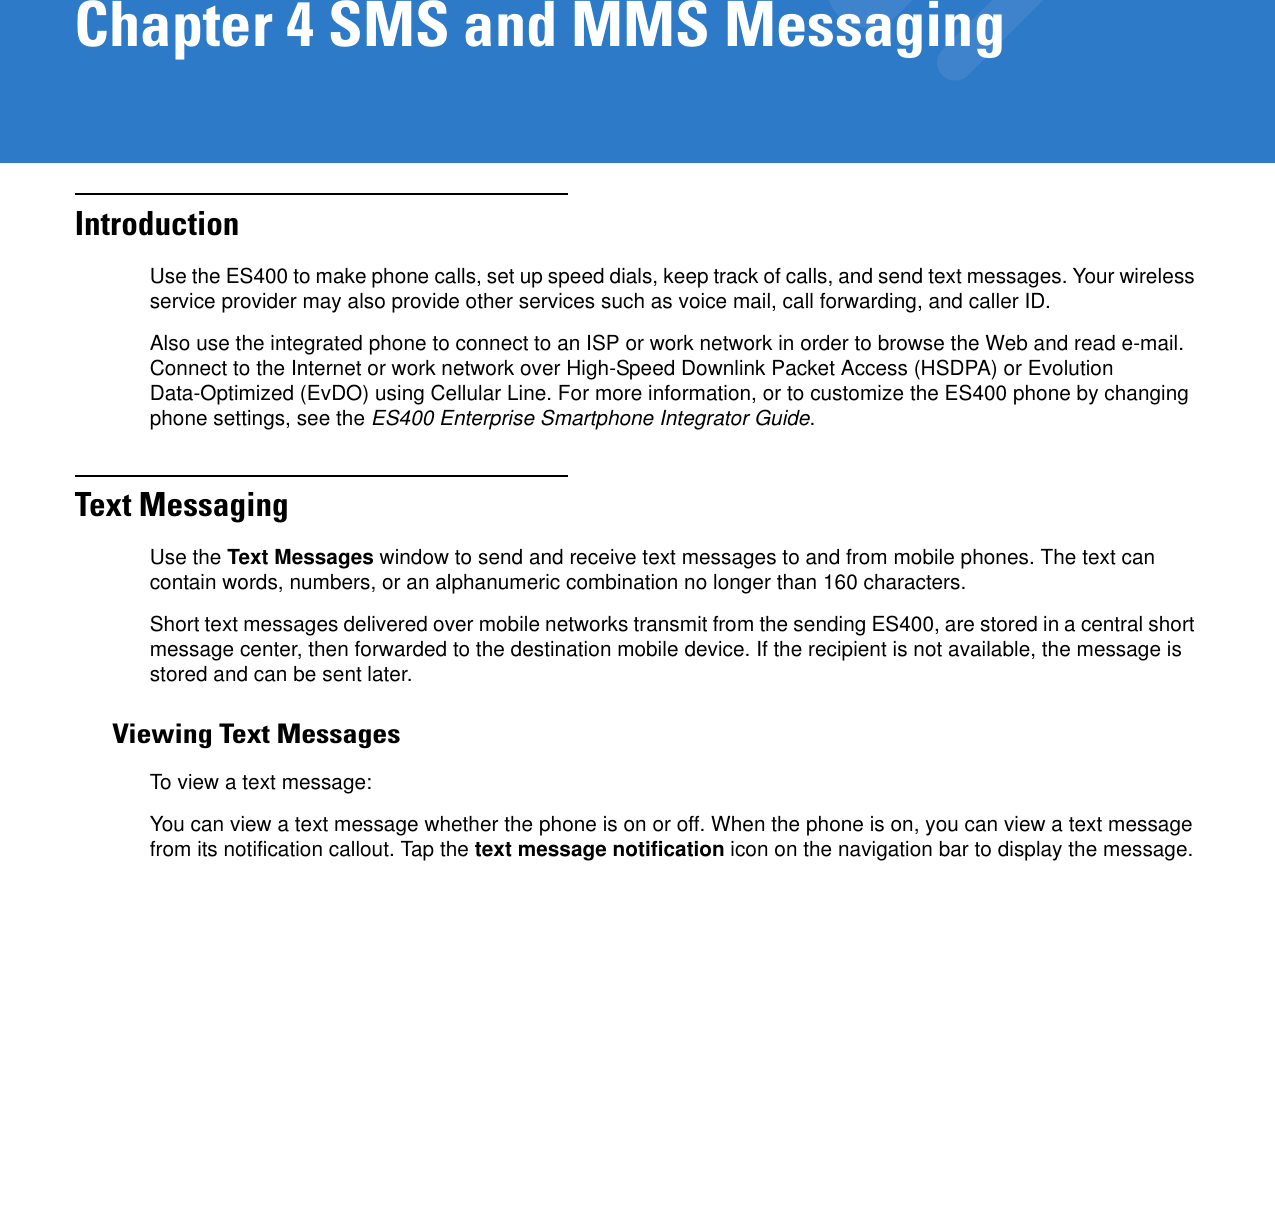 Chapter 4 SMS and MMS MessagingIntroductionUse the ES400 to make phone calls, set up speed dials, keep track of calls, and send text messages. Your wireless service provider may also provide other services such as voice mail, call forwarding, and caller ID.Also use the integrated phone to connect to an ISP or work network in order to browse the Web and read e-mail. Connect to the Internet or work network over High-Speed Downlink Packet Access (HSDPA) or Evolution Data-Optimized (EvDO) using Cellular Line. For more information, or to customize the ES400 phone by changing phone settings, see the ES400 Enterprise Smartphone Integrator Guide.Text MessagingUse the Text Messages window to send and receive text messages to and from mobile phones. The text can contain words, numbers, or an alphanumeric combination no longer than 160 characters.Short text messages delivered over mobile networks transmit from the sending ES400, are stored in a central short message center, then forwarded to the destination mobile device. If the recipient is not available, the message is stored and can be sent later.Viewing Text MessagesTo view a text message:You can view a text message whether the phone is on or off. When the phone is on, you can view a text message from its notification callout. Tap the text message notification icon on the navigation bar to display the message.